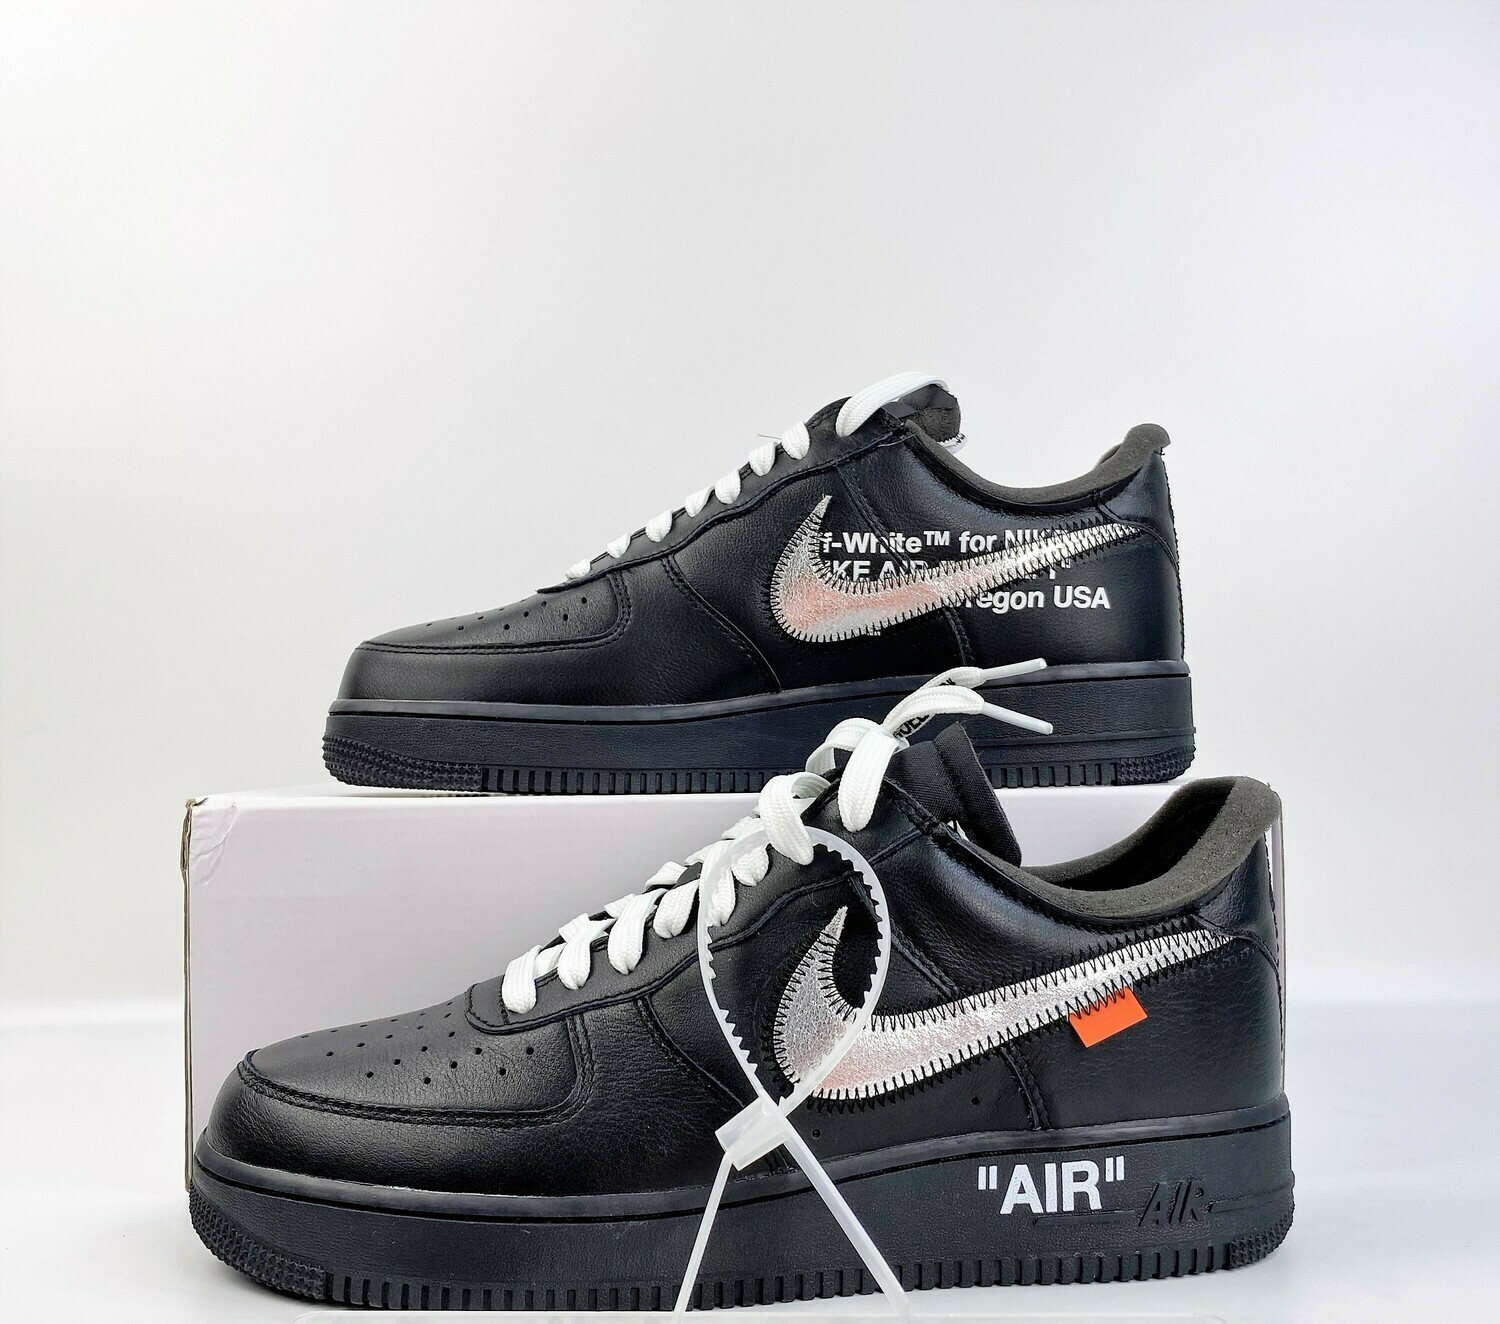 SNEAKERS NIKE X OFF-WHITE AIRFORCE 1 '07 VIRGIL X MOMA BLACK